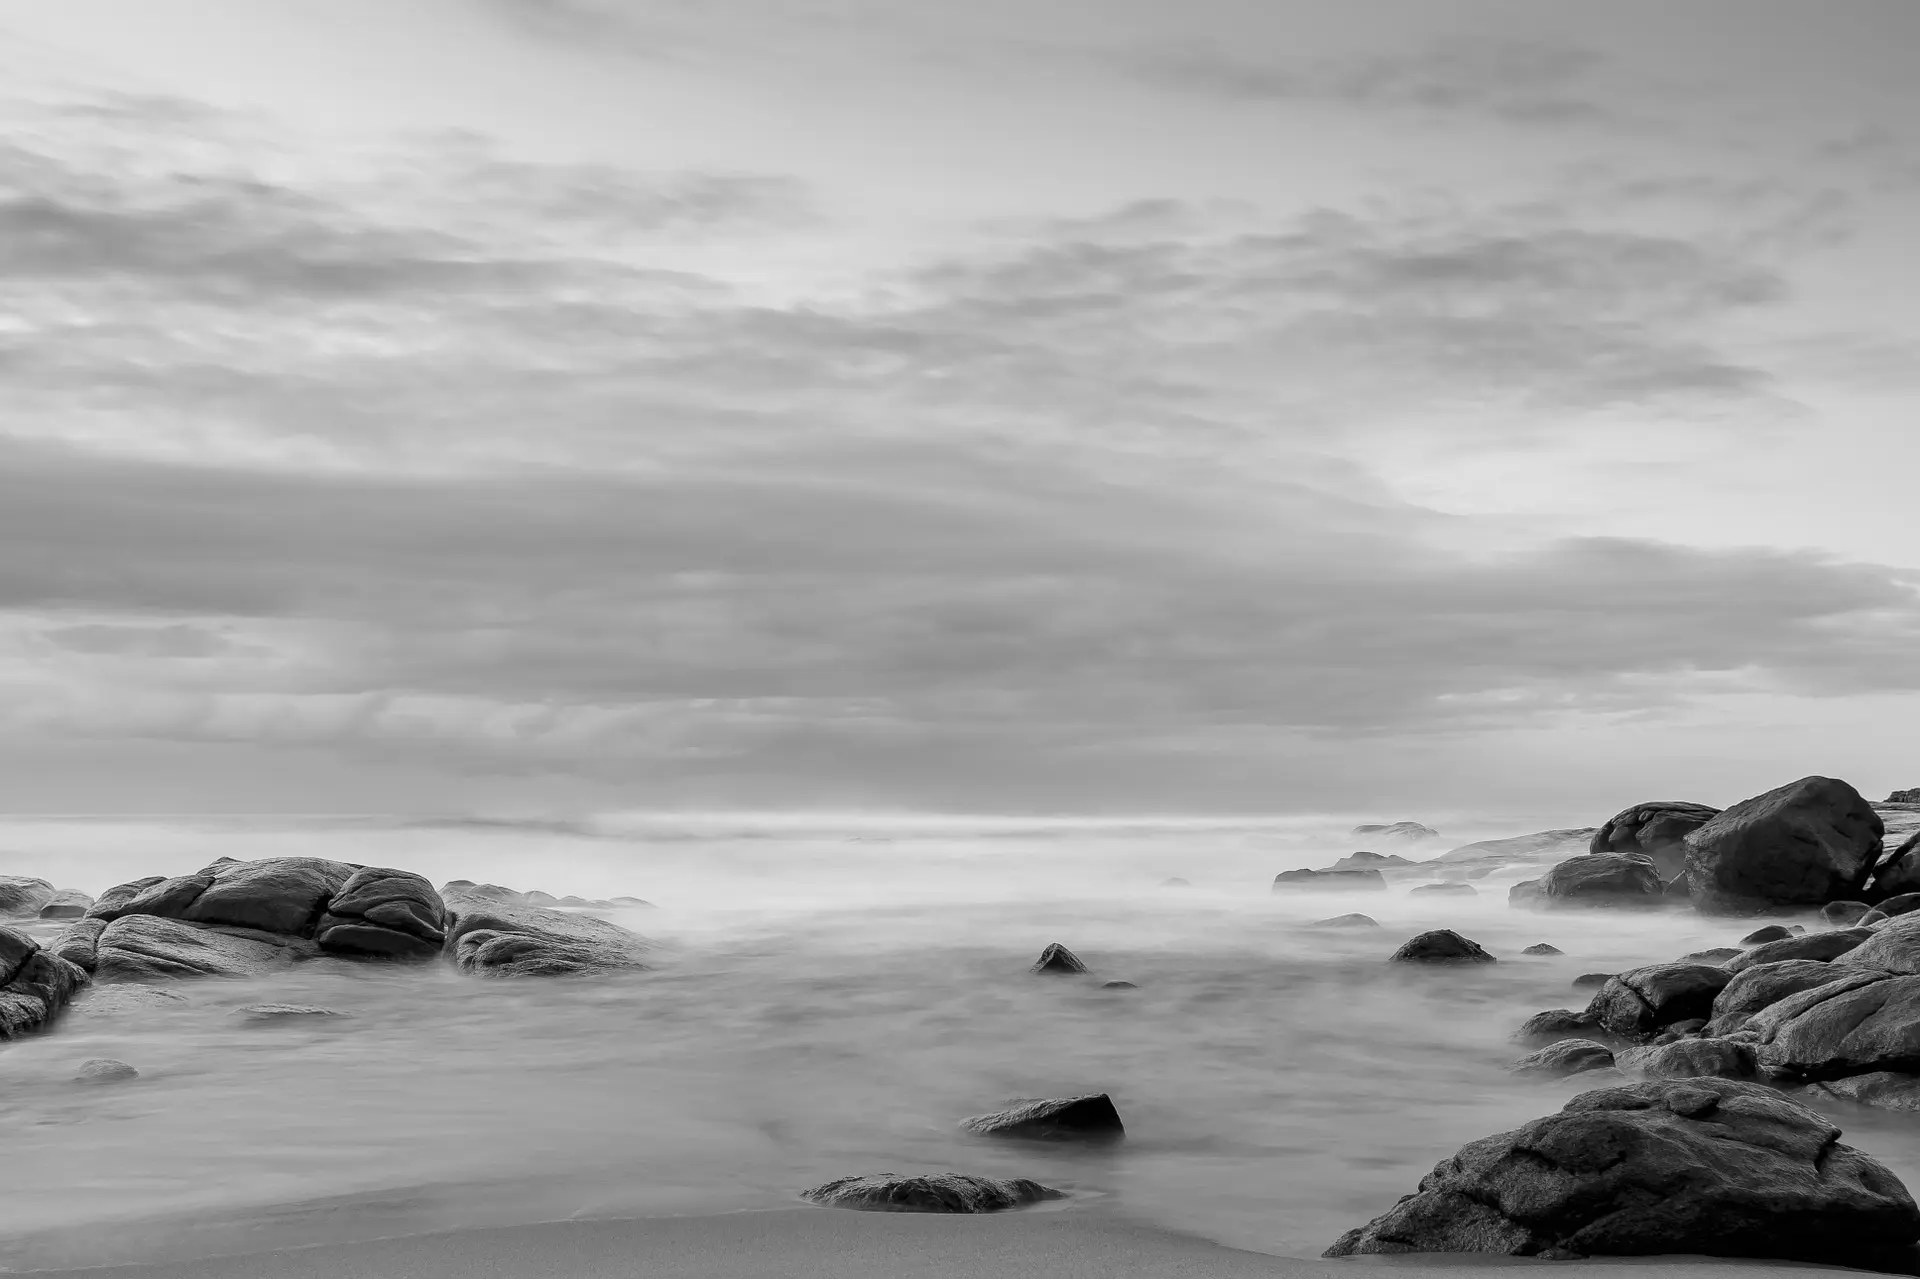 39 Stunning Images Of Beaches In Black And White | Light Stalking